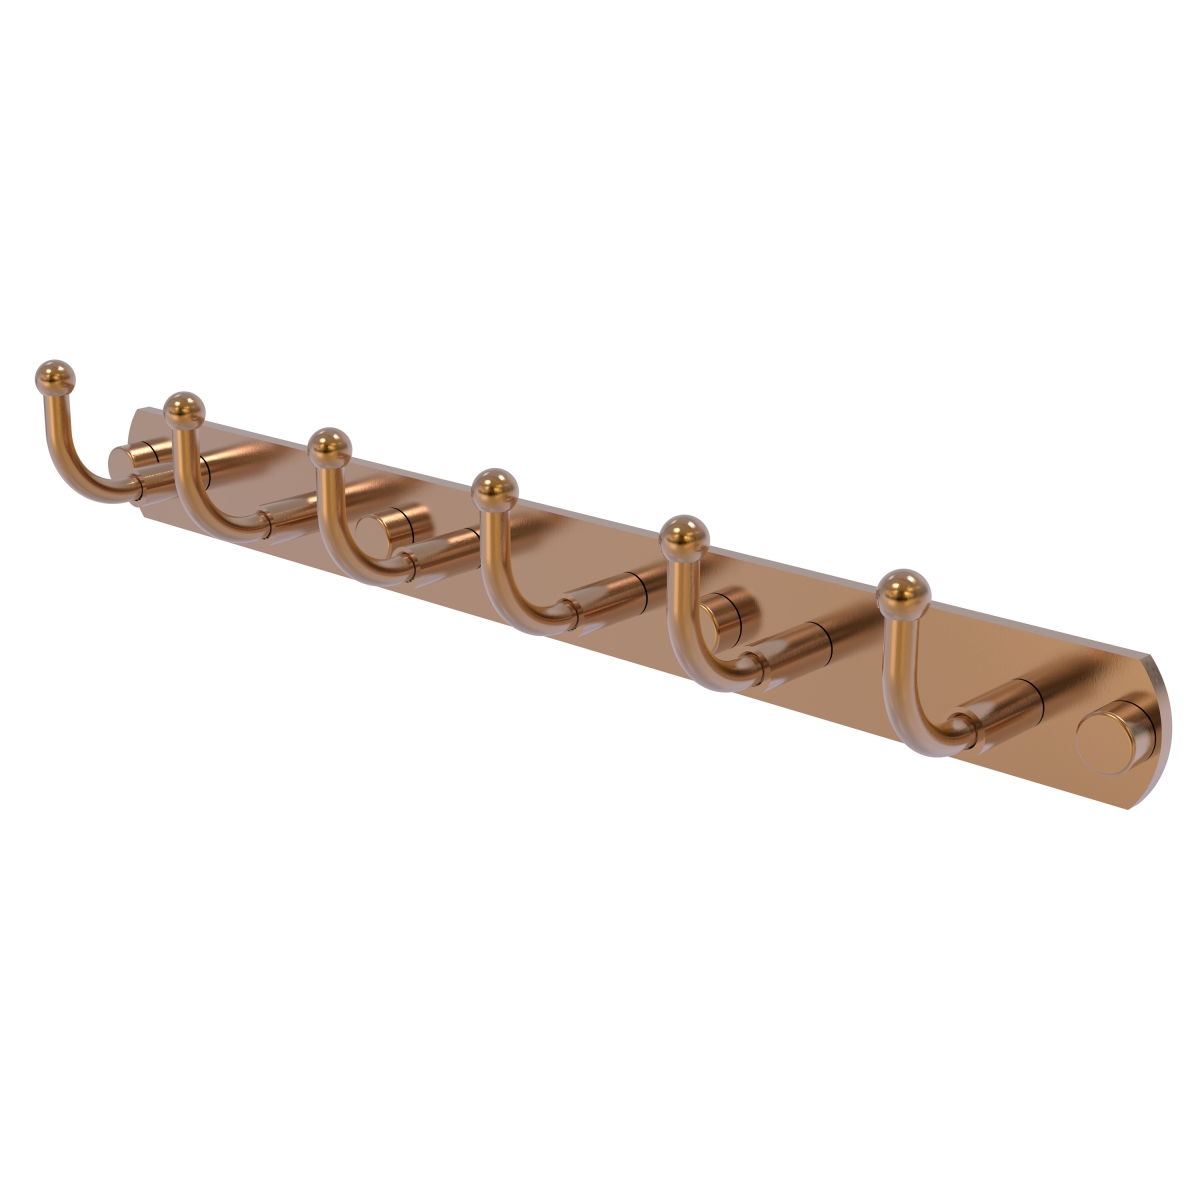 Picture of Allied Brass 1020-6-BBR Skyline Collection 6 Position Tie & Belt Rack, Brushed Bronze